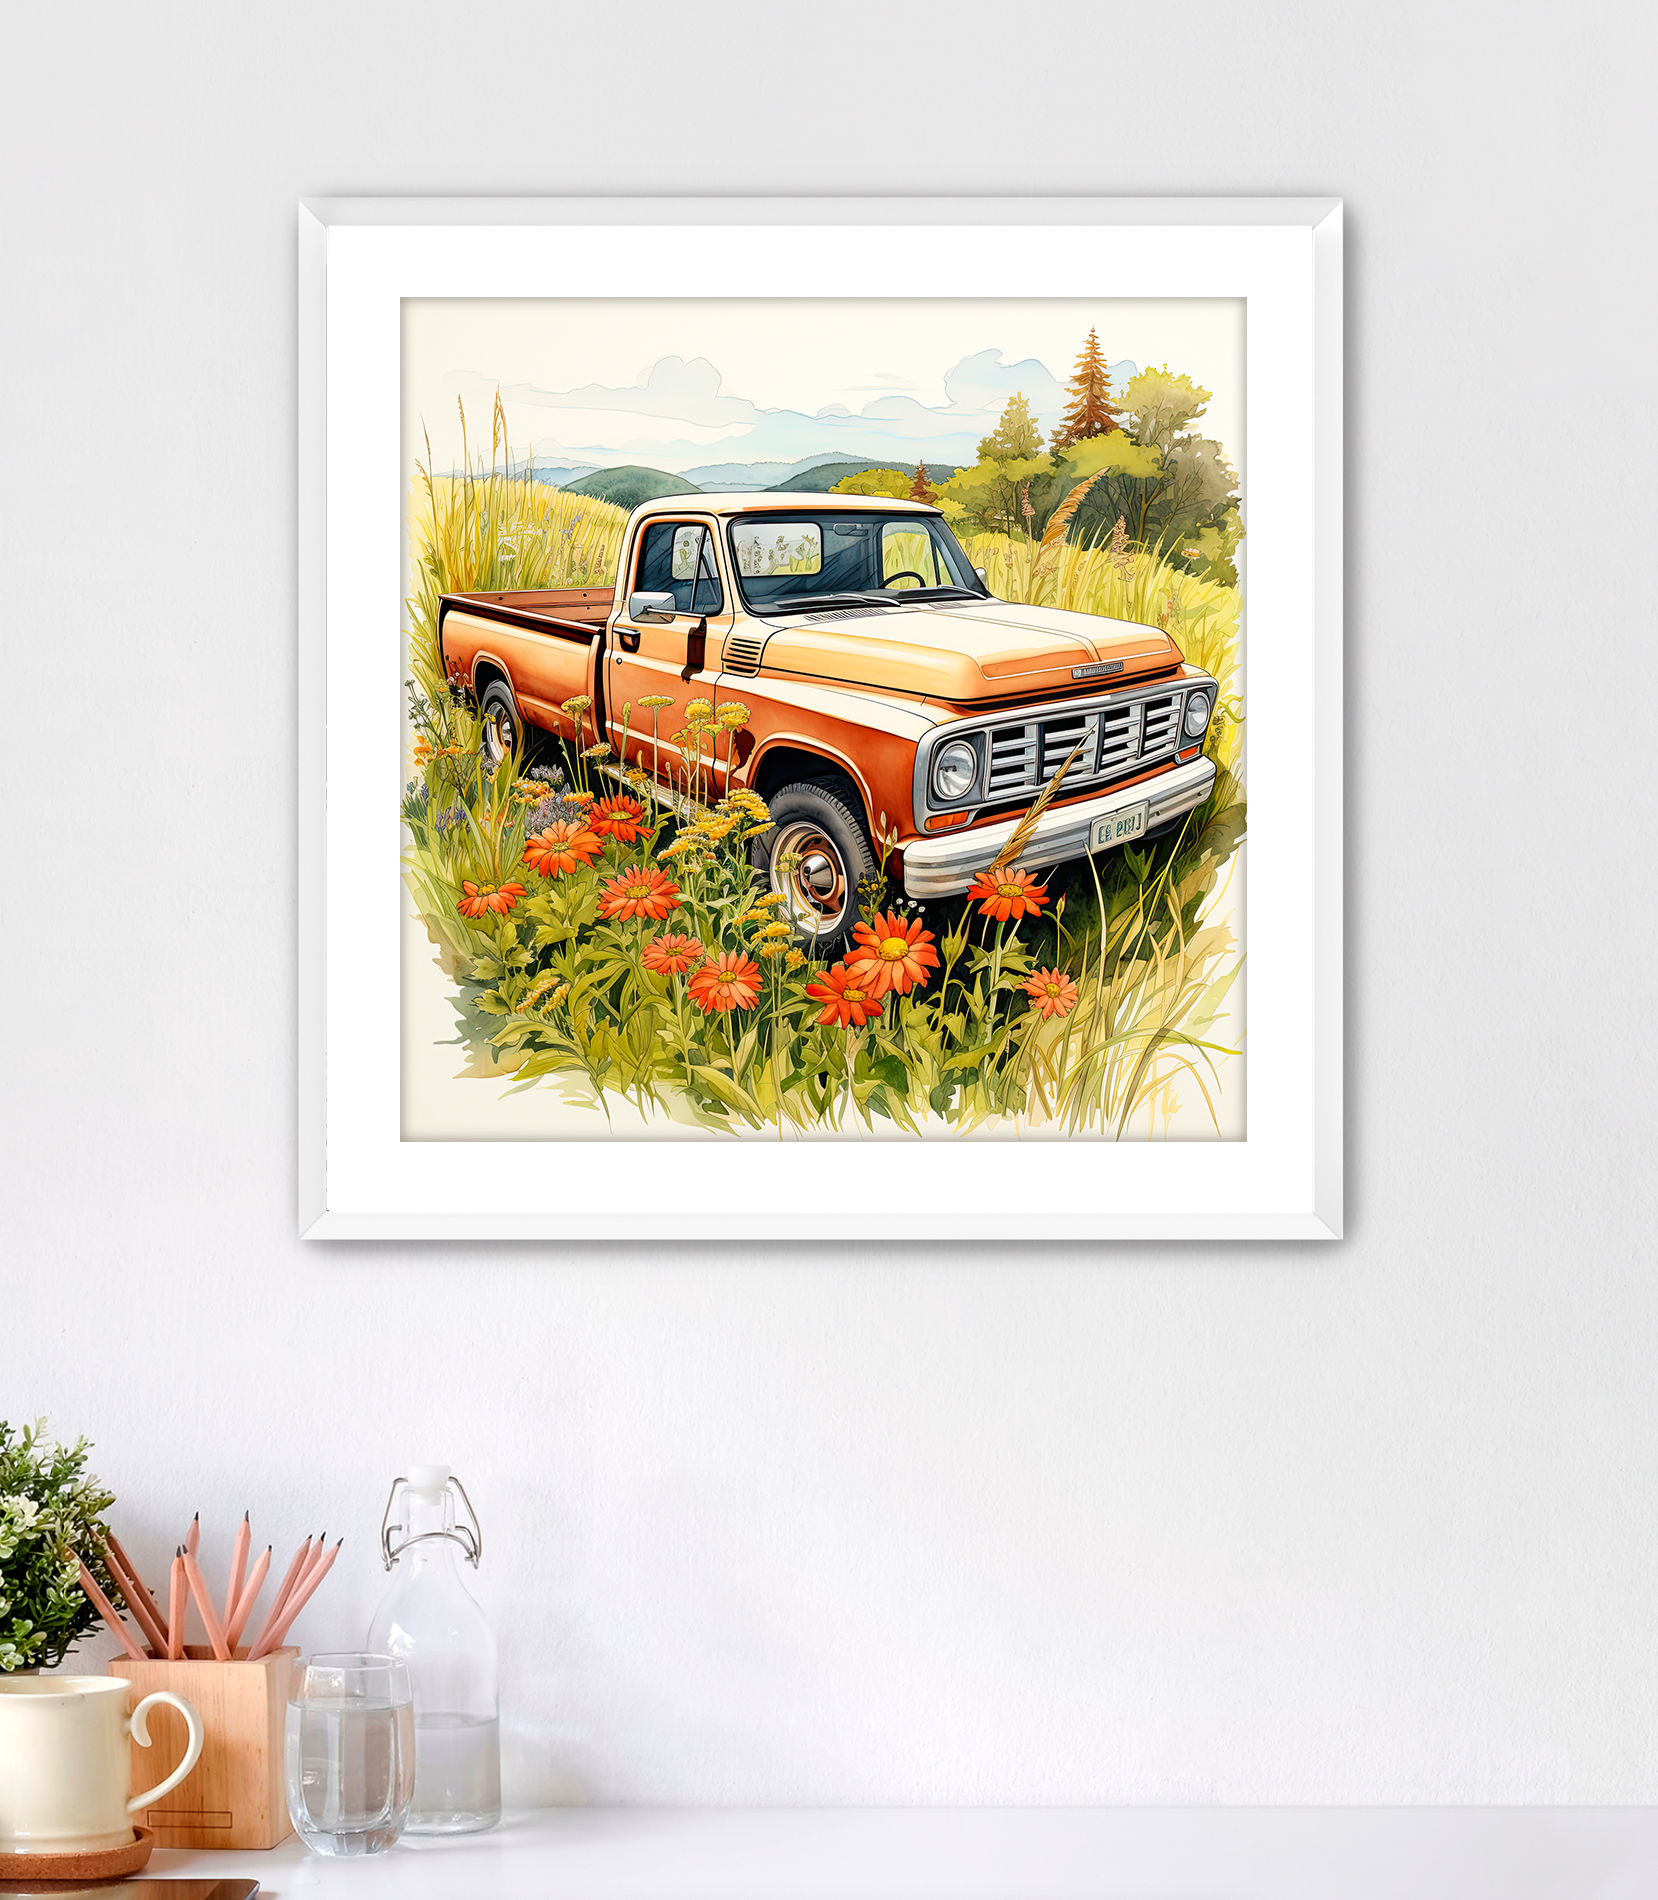 Rustic burnt orange pickup truck in a country field of flowers art, framed with white mat and white frame. Country art for sale.customconcepts.art